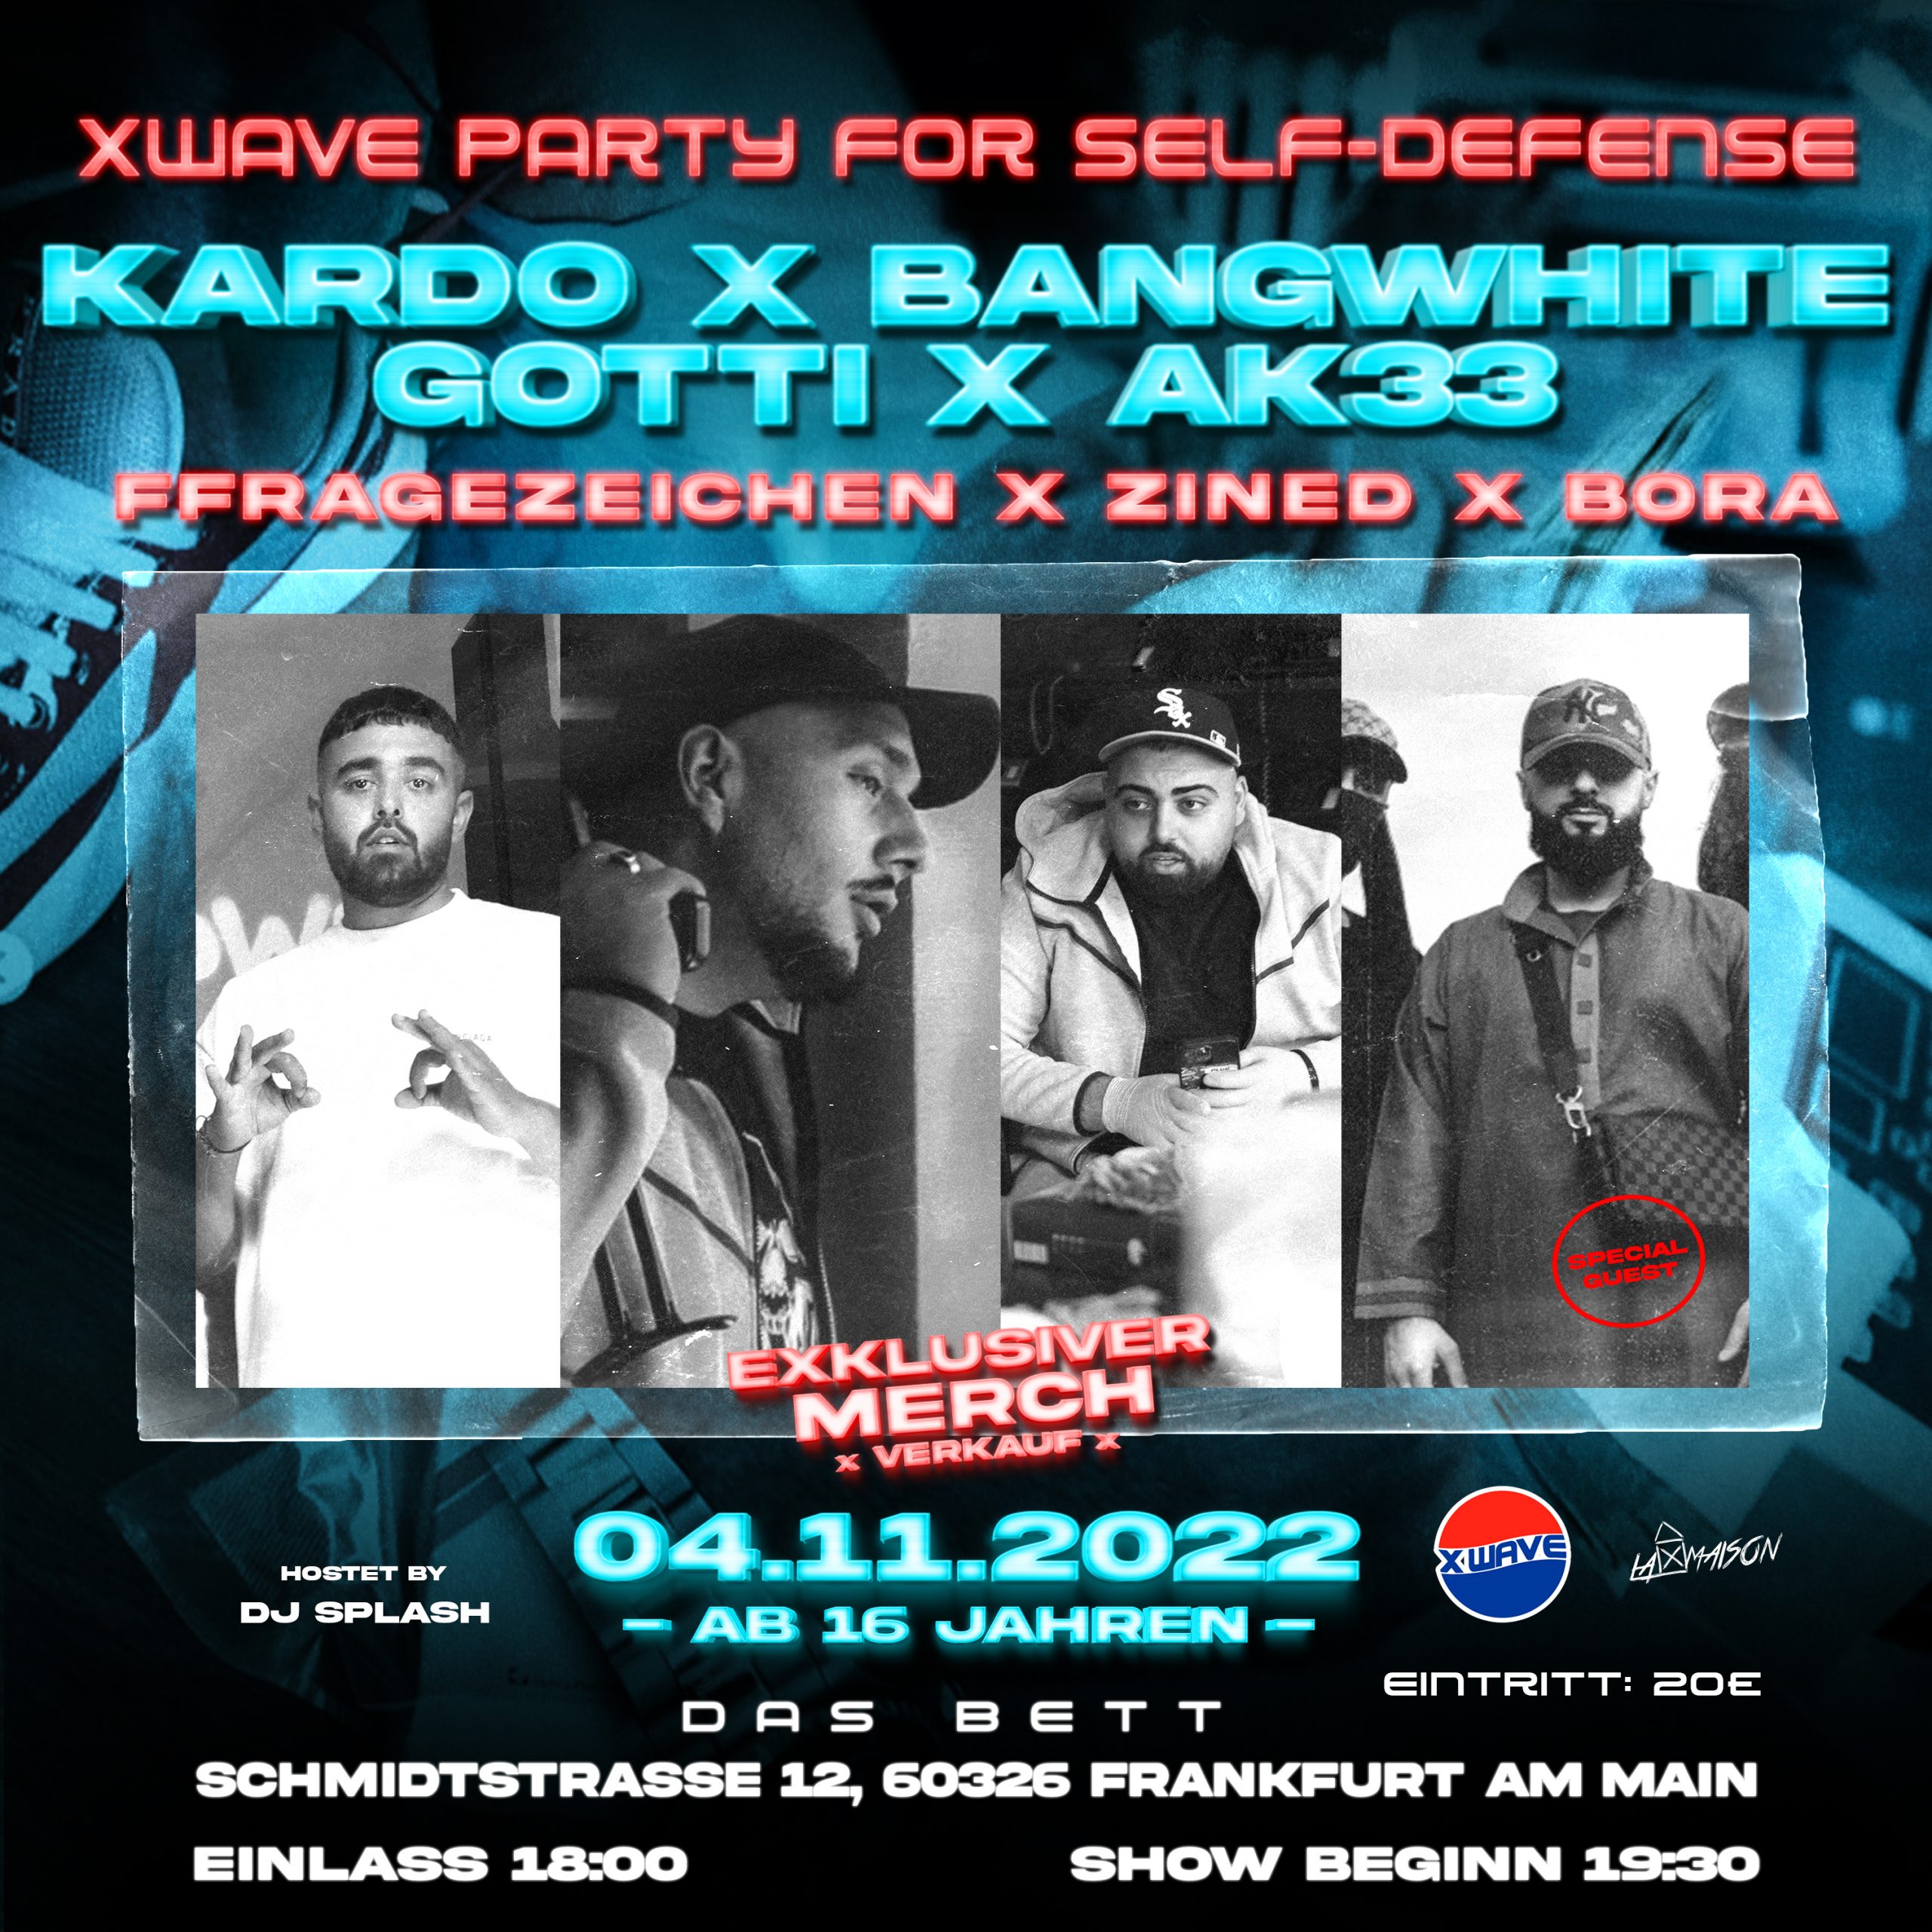 XWAVE PARTY FOR SELF-DEFENSE